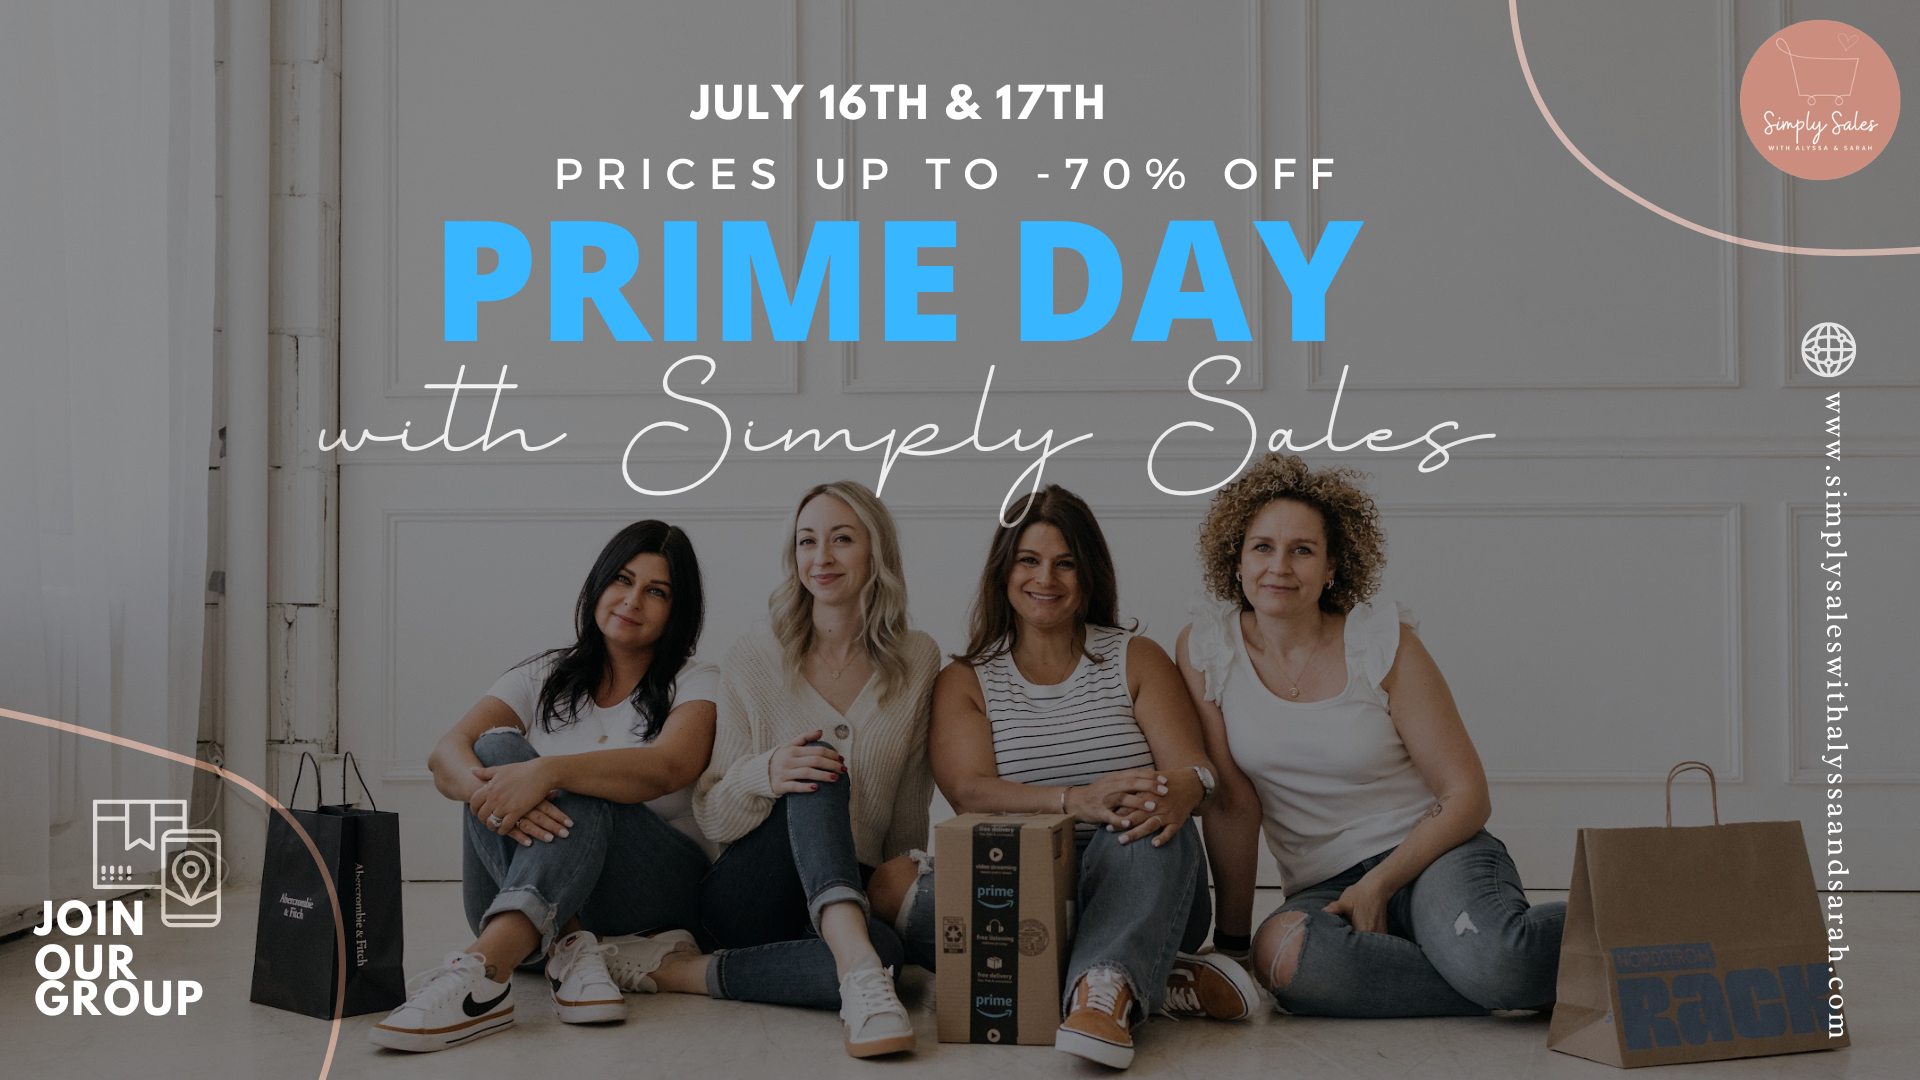 July 16th & 17th Prices up to 70% off Prime Day with Simply Sales